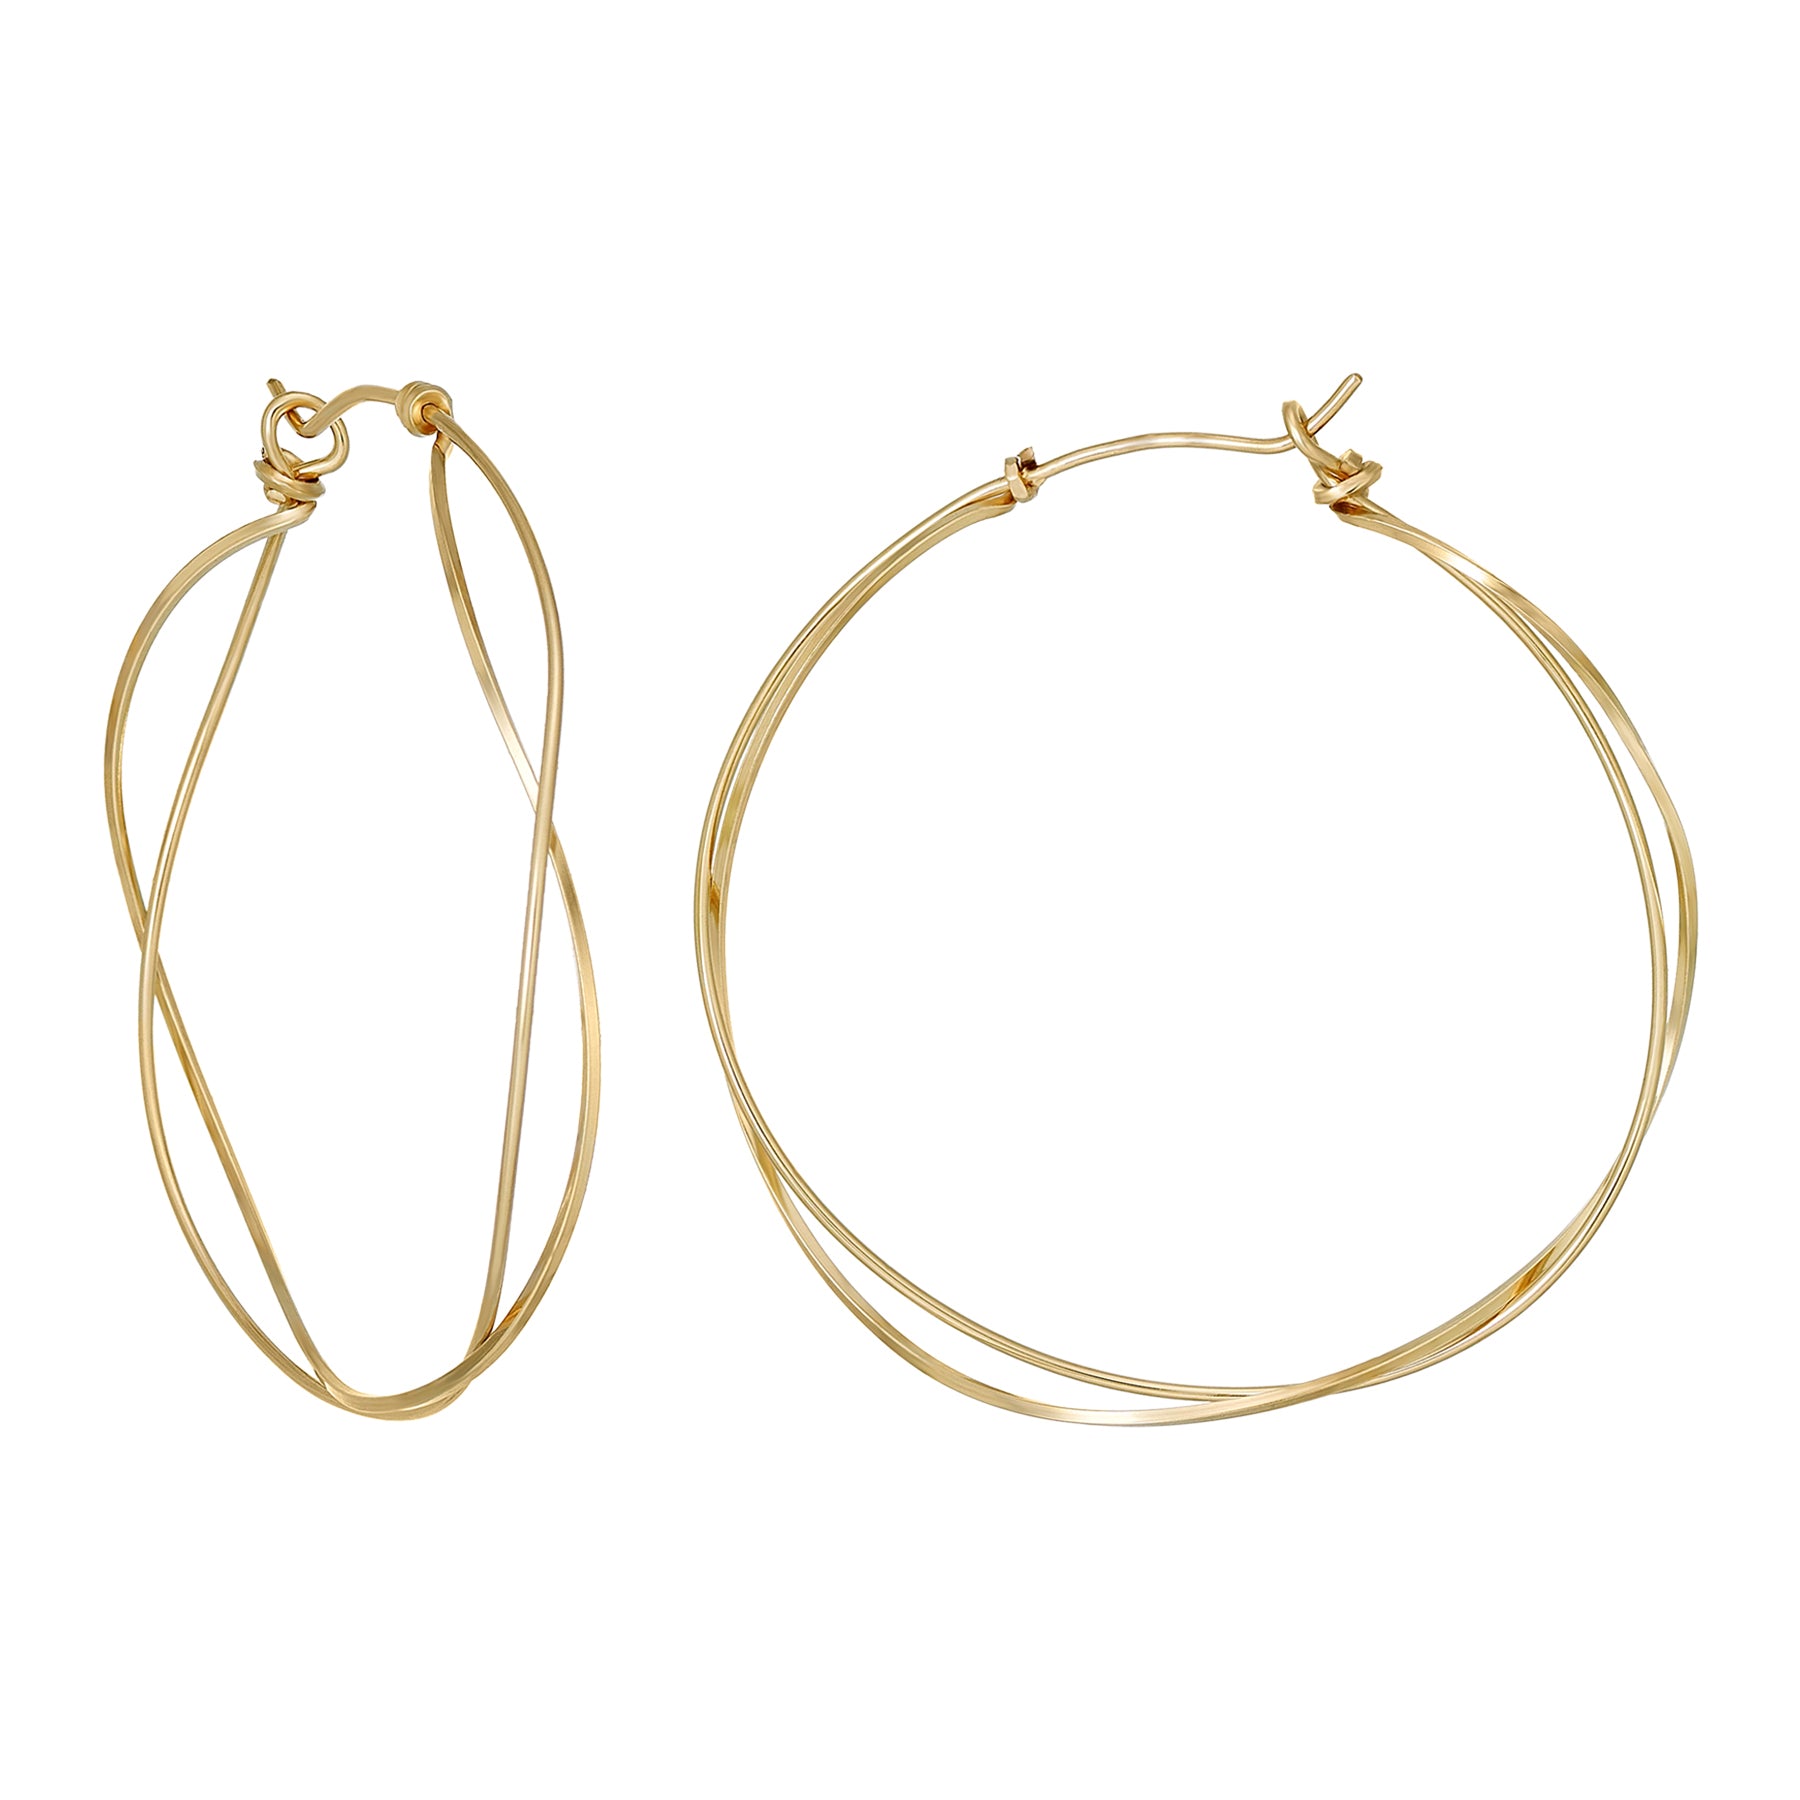 Gold Filled Twisted Hoop Earrings - Product Image